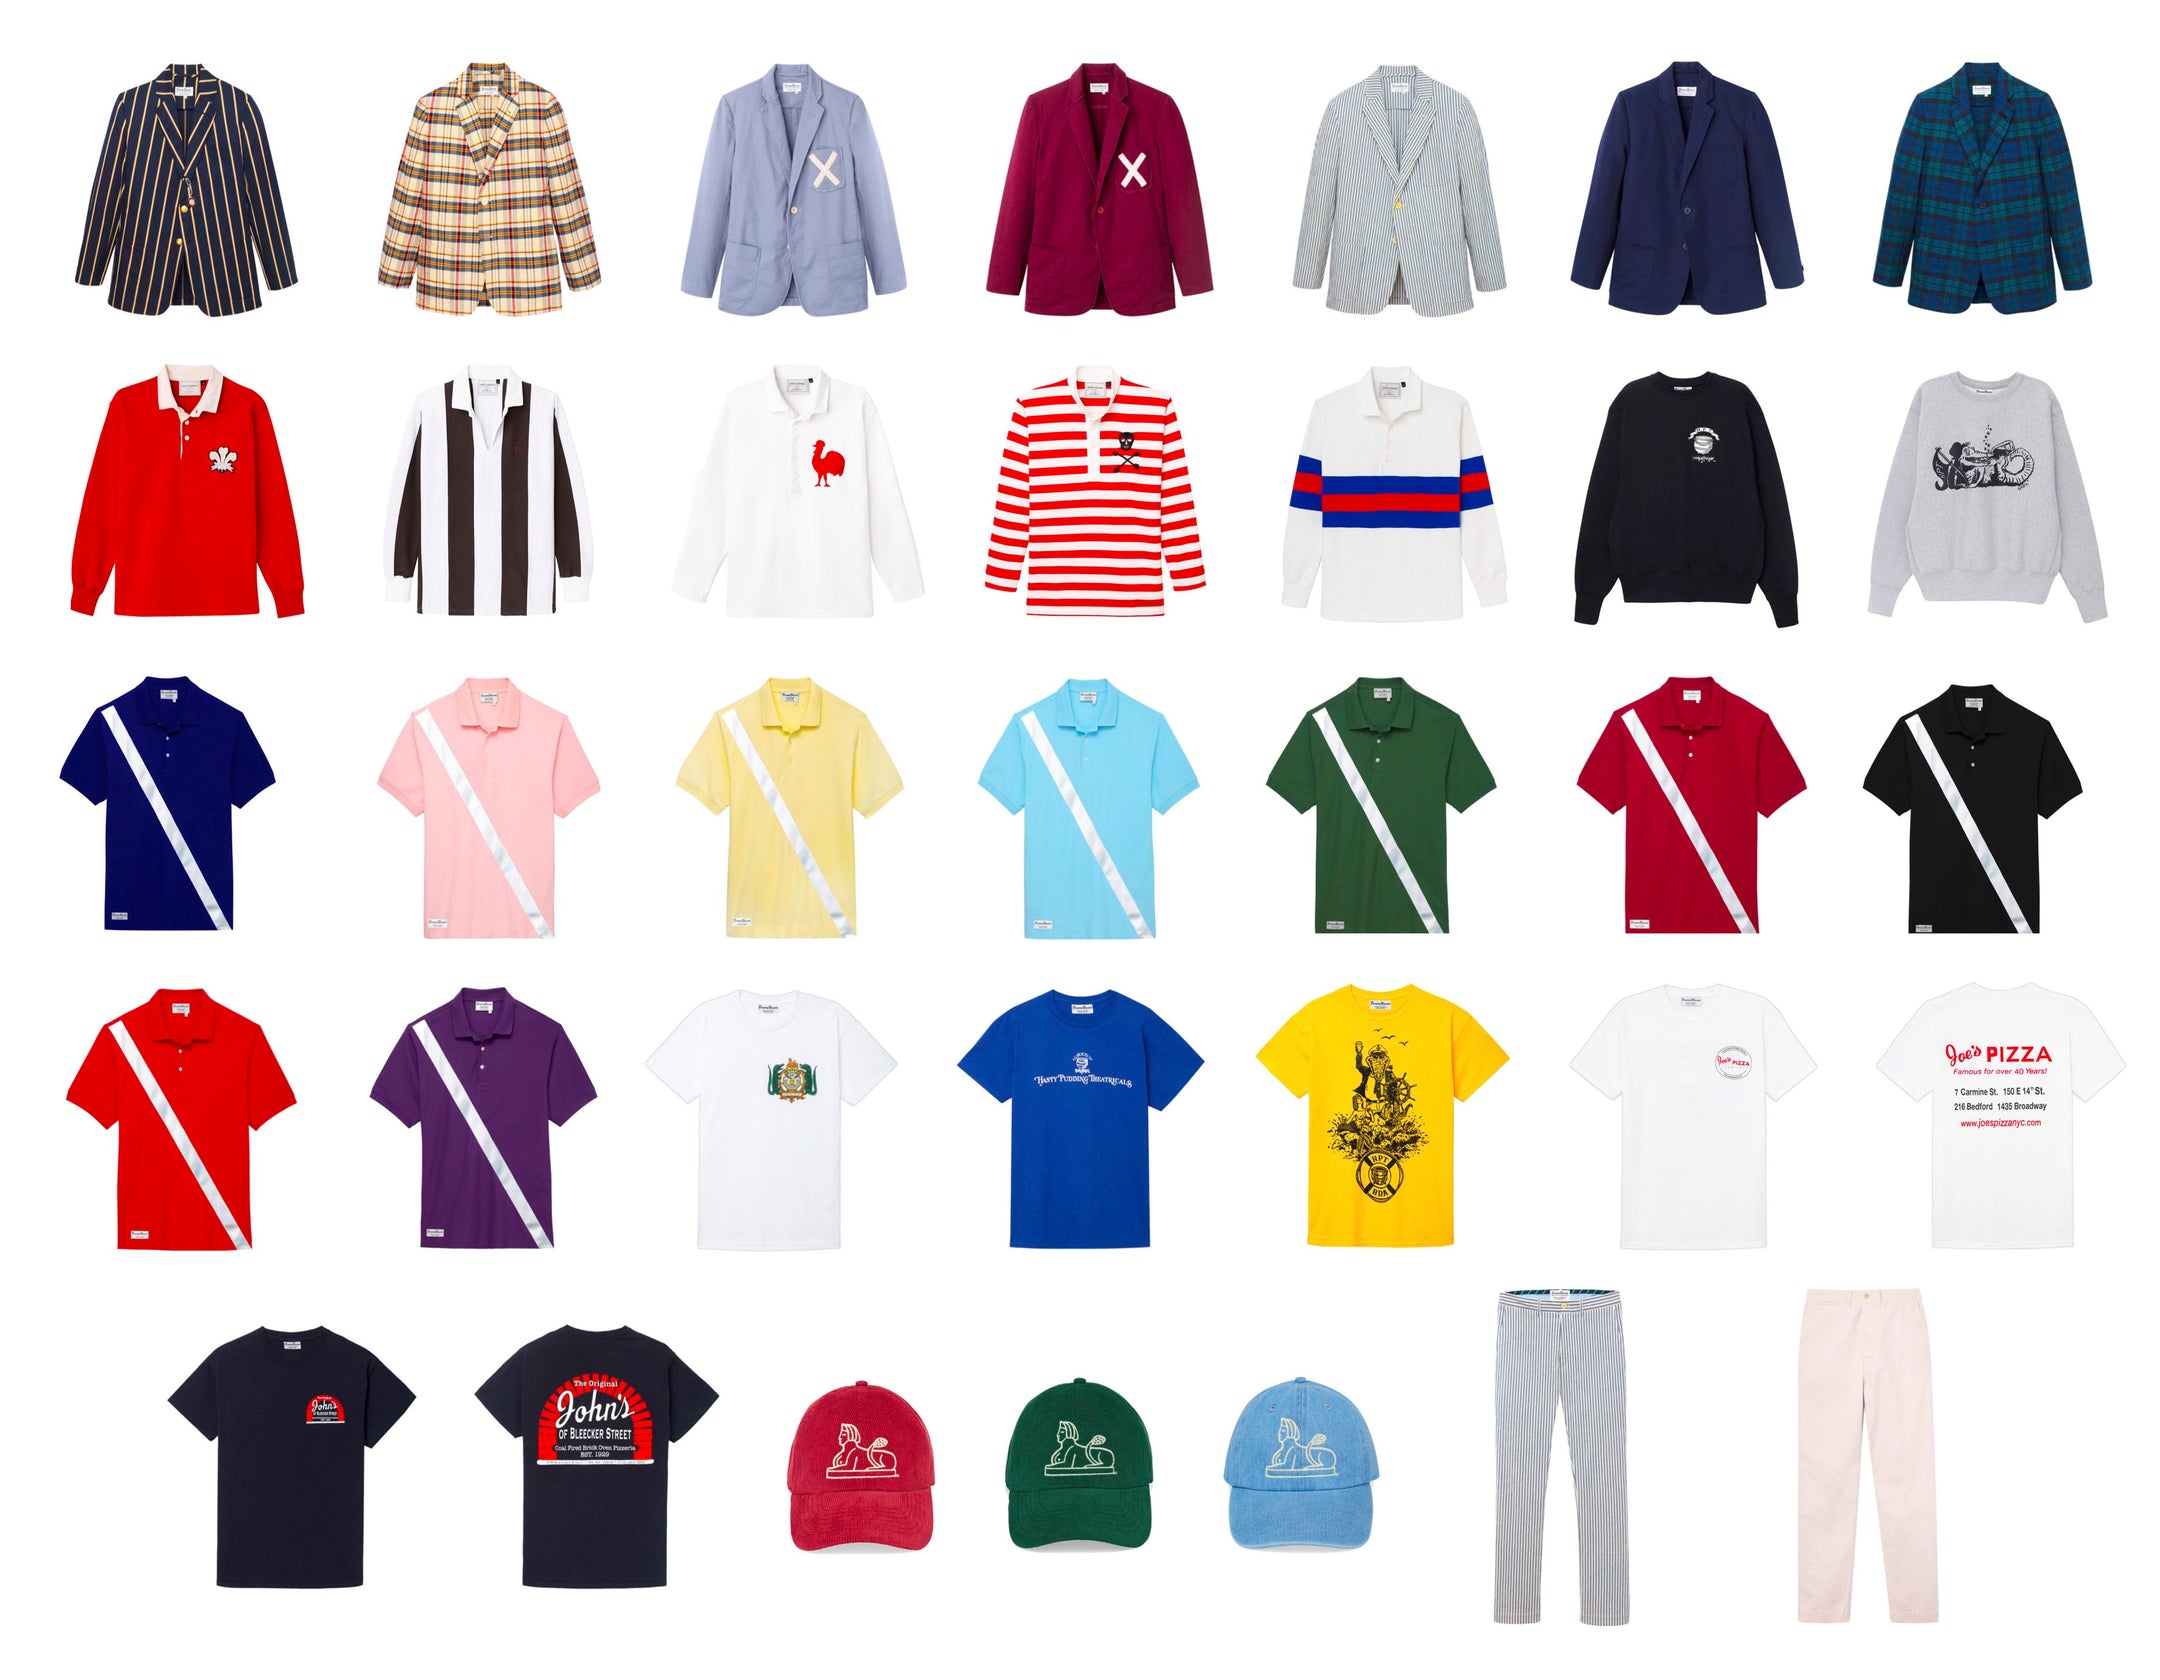 RB SPRING/SUMMER 2018 (First Drop Thursday, March 15th)